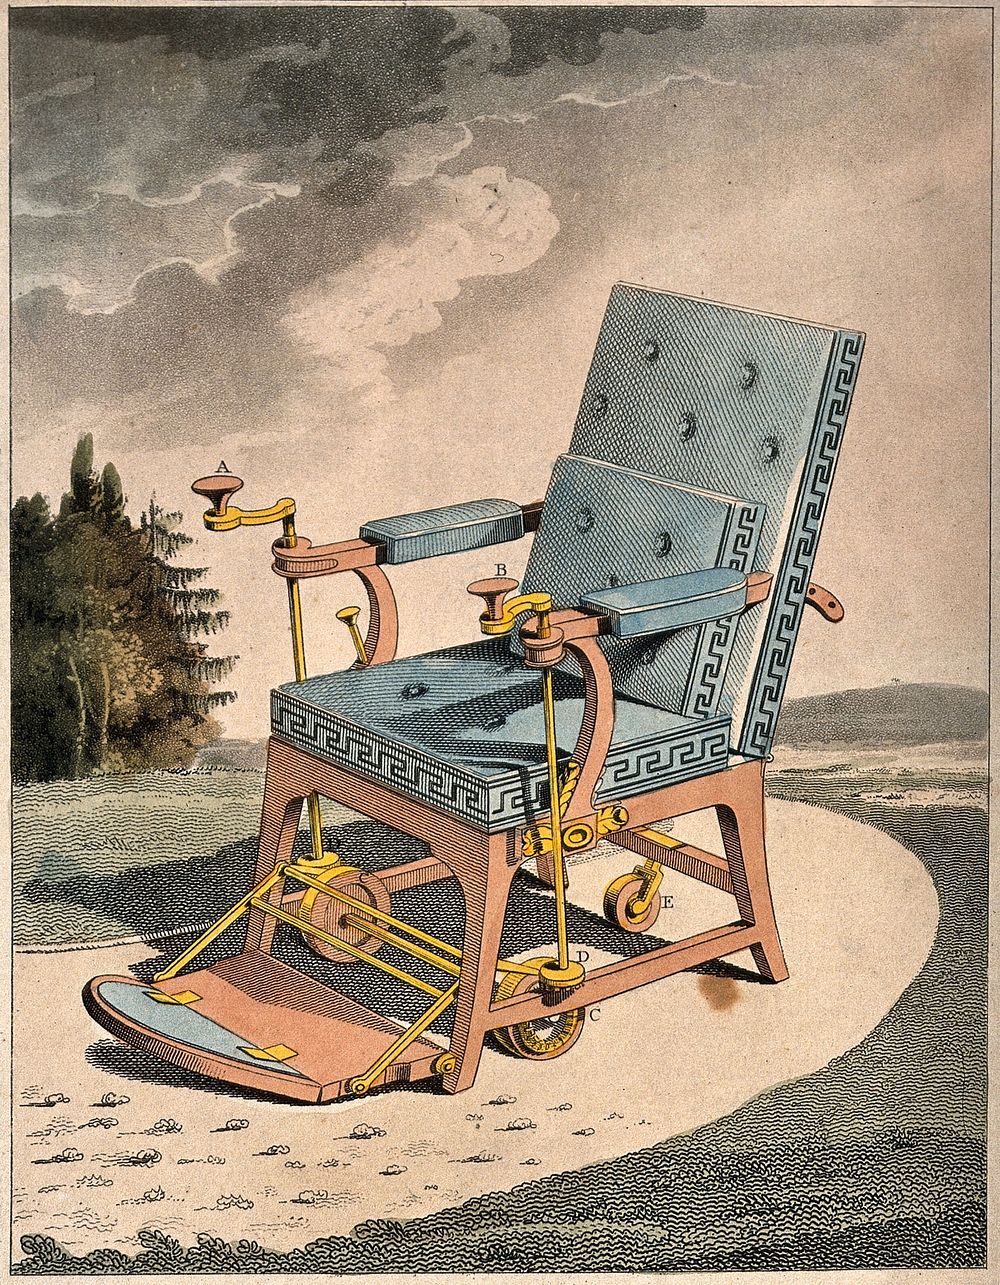 Merlin's mechanical chair for the elderly or infirm: the design incorporates hand-cranks, wheels, gears and an adjustable…